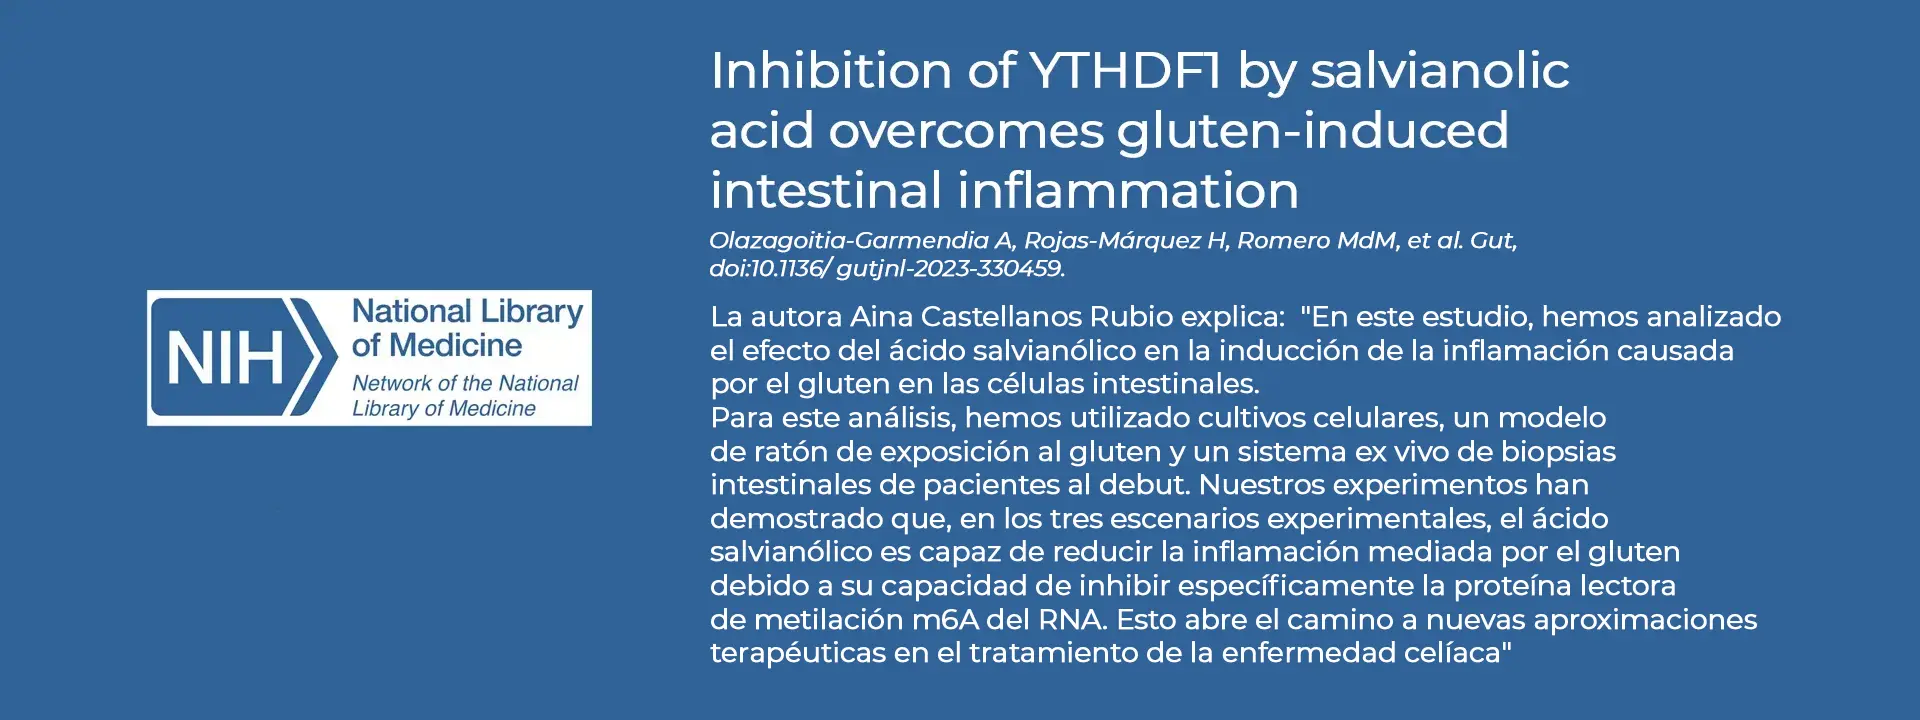 Inhibition of YTHDF1 by salvianolic acid overcomes gluten-induced intestinal inflammation